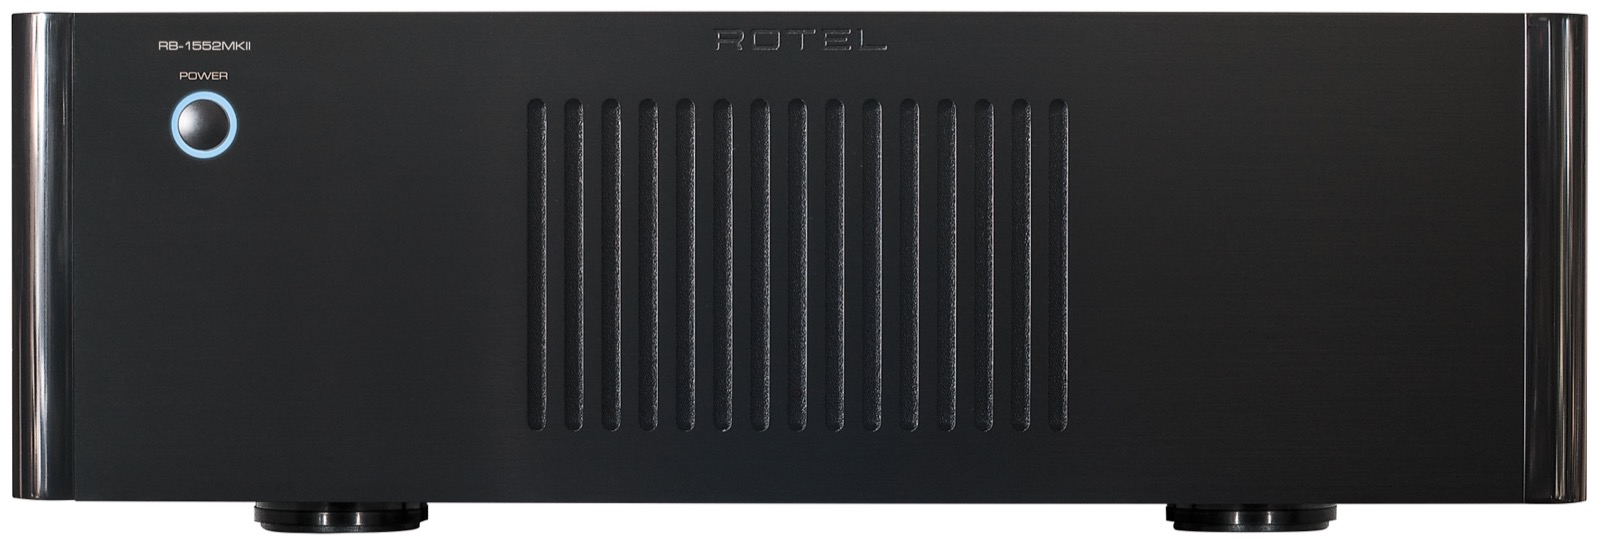 Rotel RB-1552MKII Stereo-Endstufe schwarz